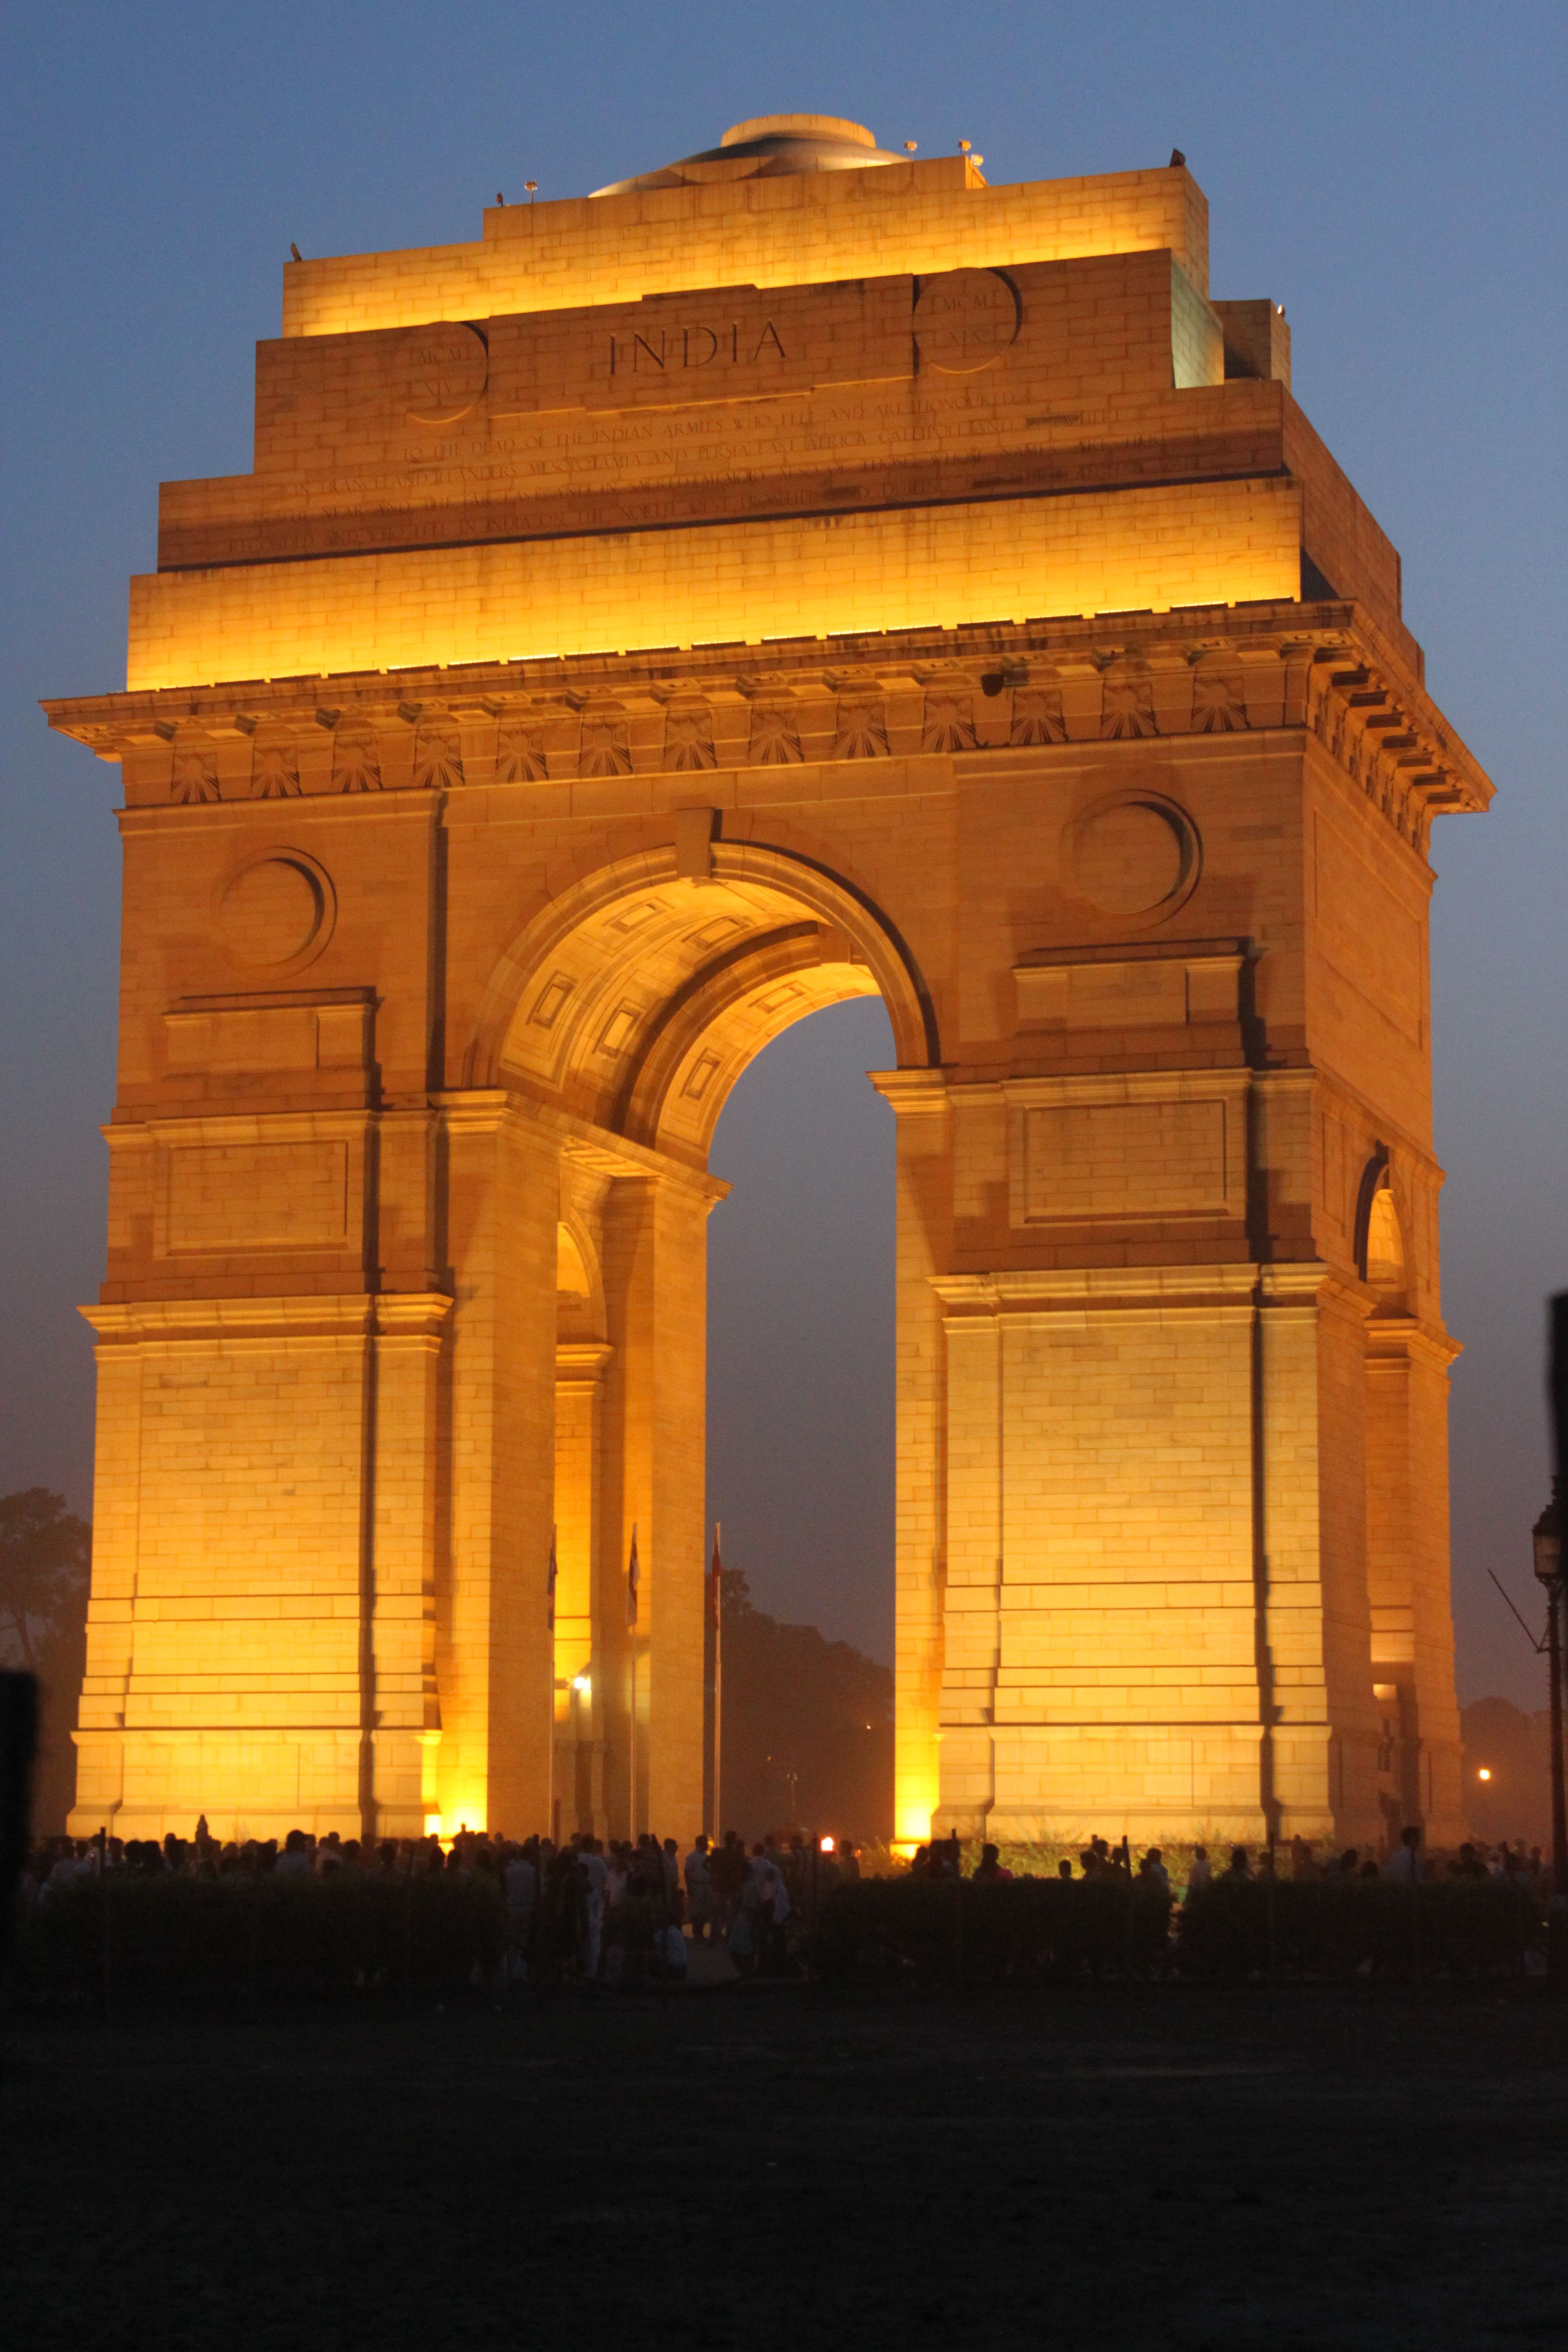 Hd Background Images Of India Gate At Night - Wallpaper Cave